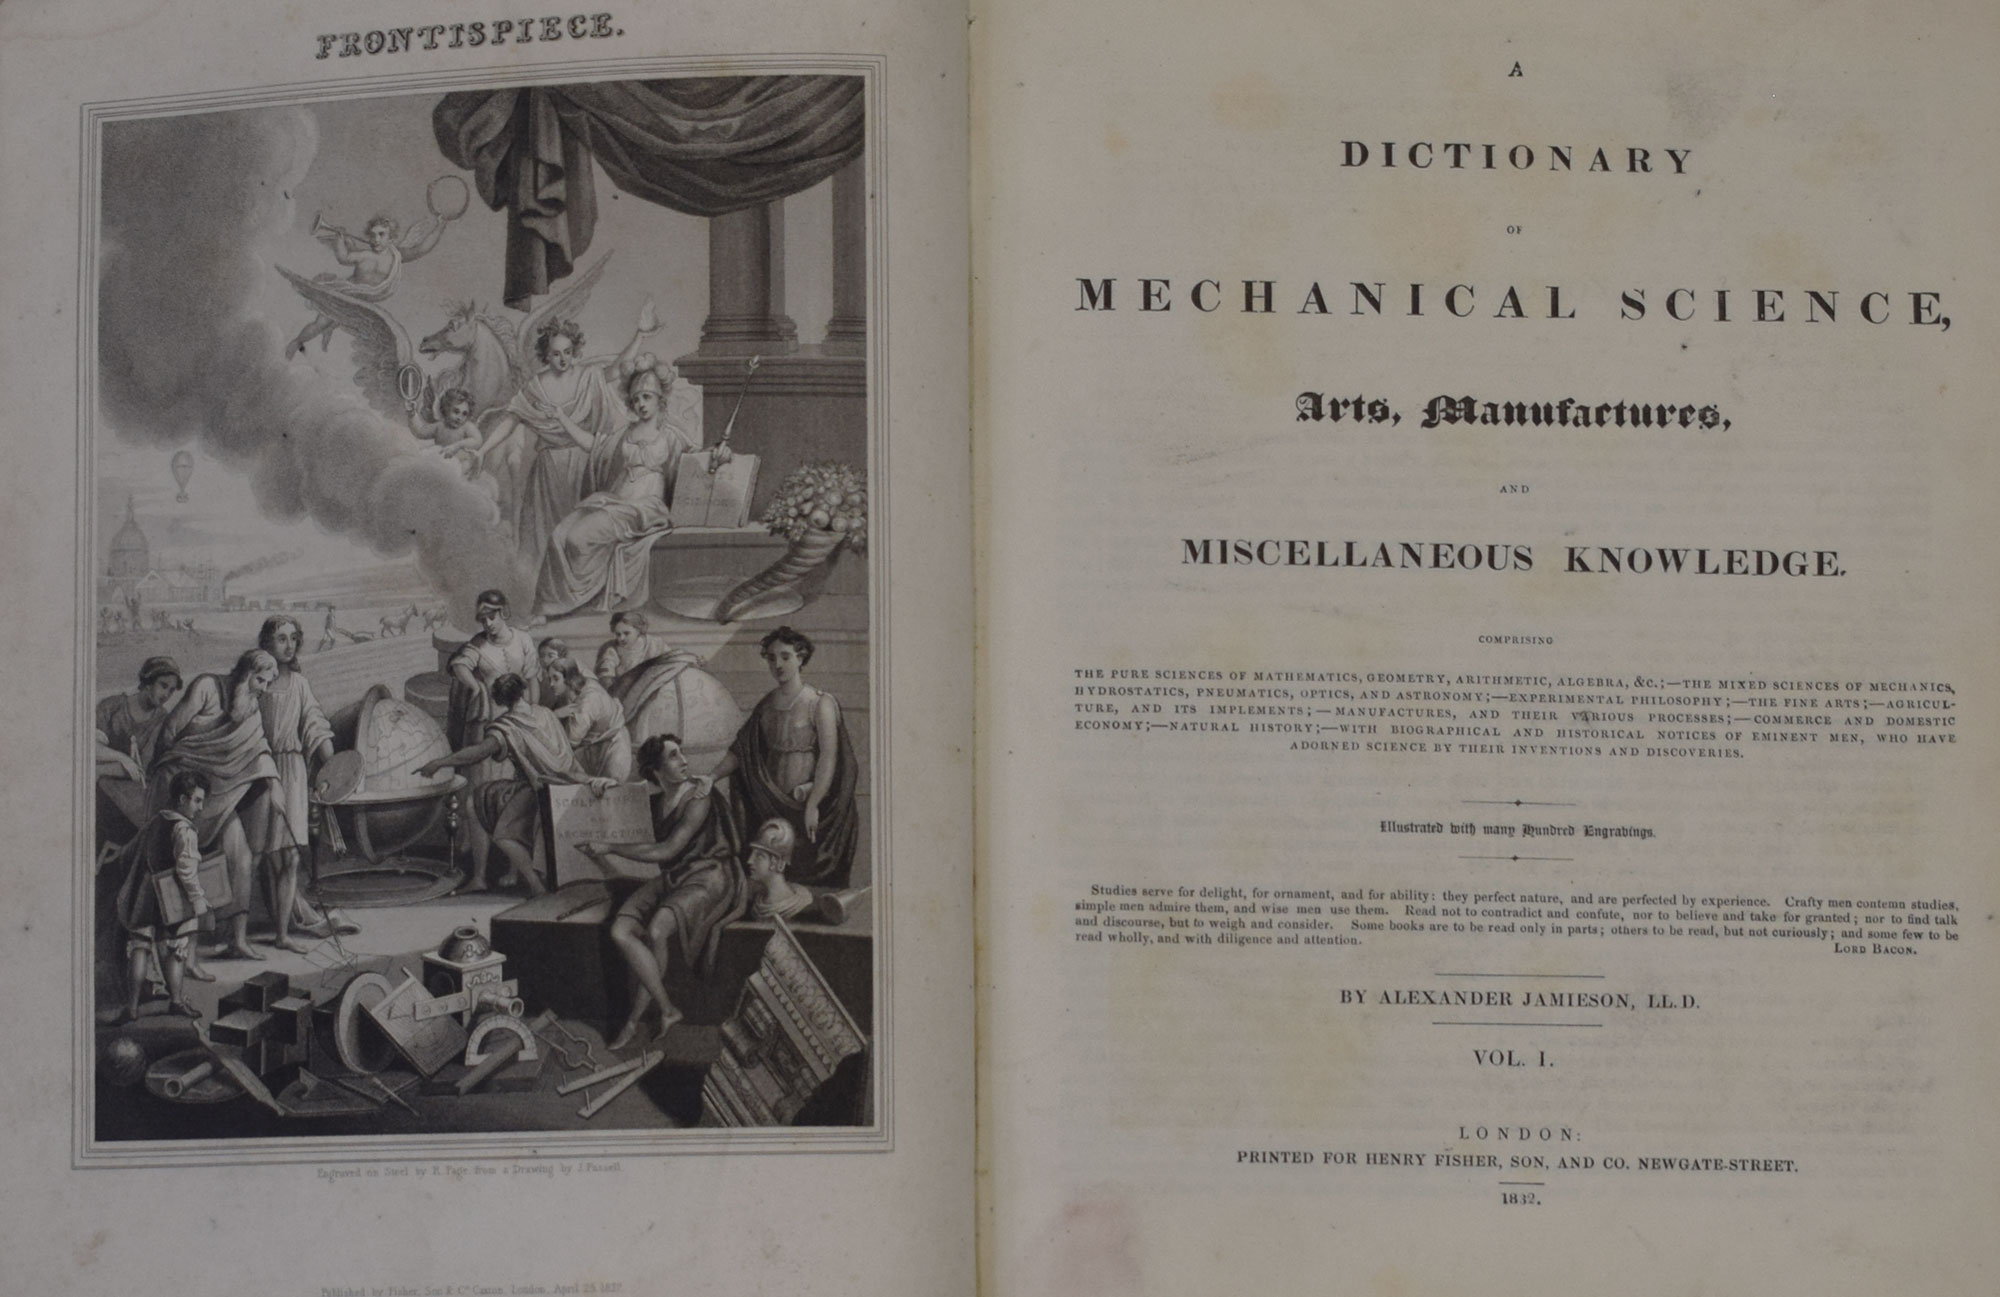 A Dictionary of Mechanical Science, Arts, Manufacturers and Miscellaneous Knowledge. 2 volume set.